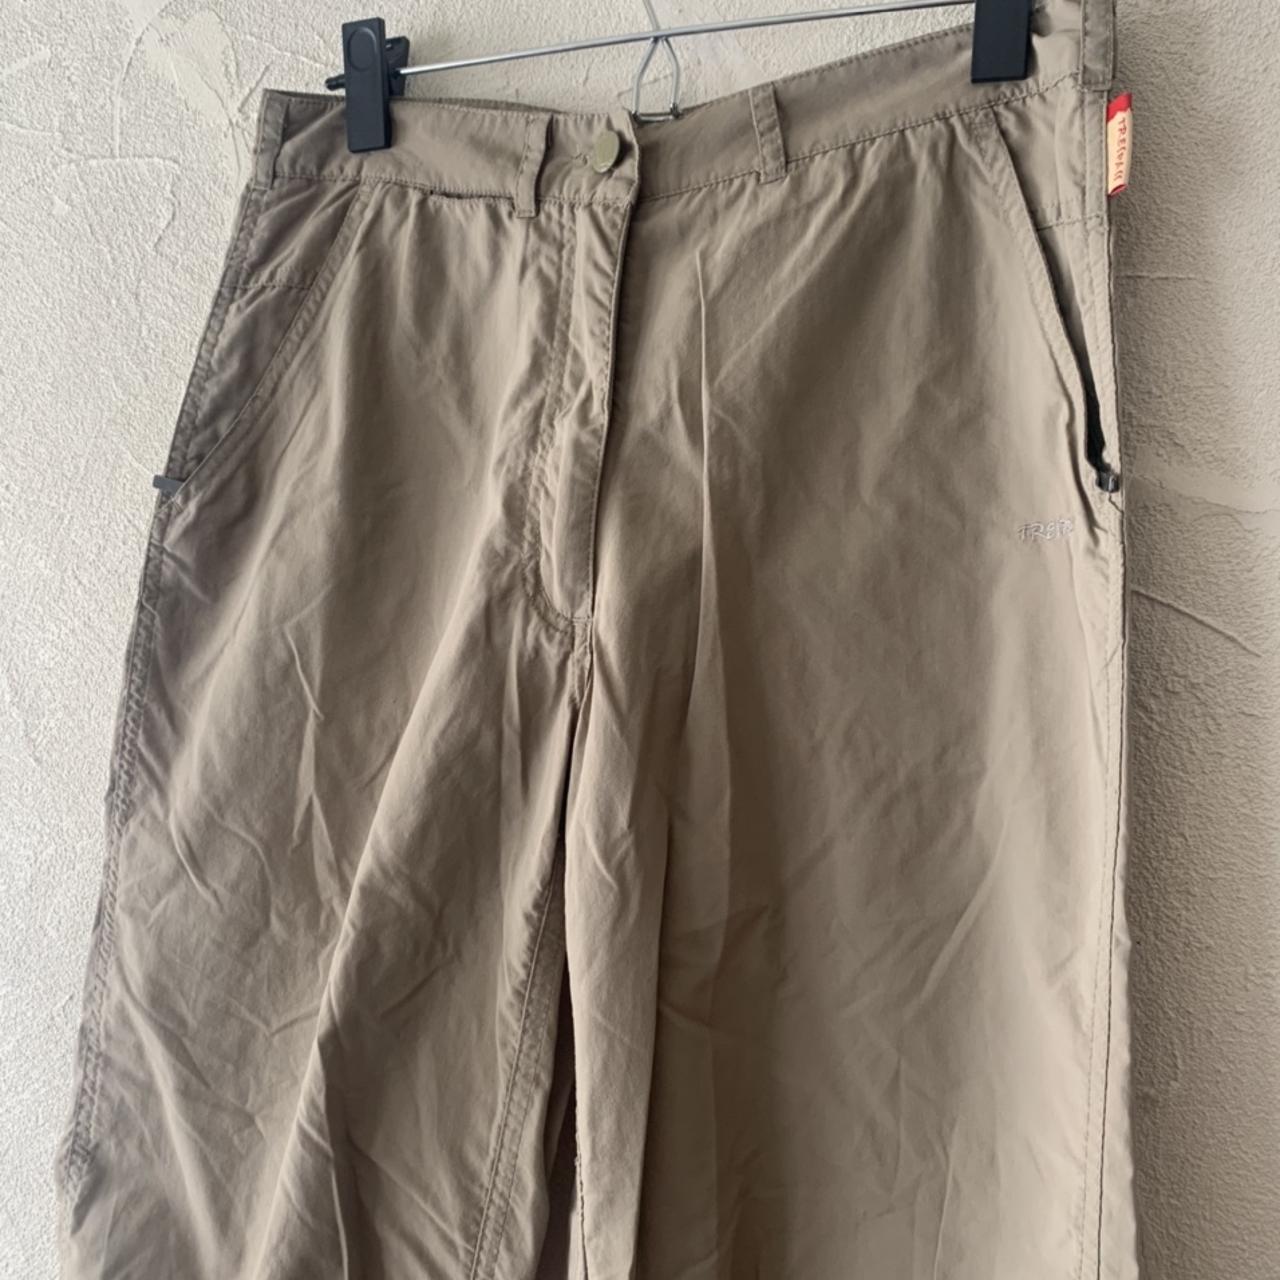 Product Image 1 - Vintage Trespass Outdoor Pants
No flaws
Size